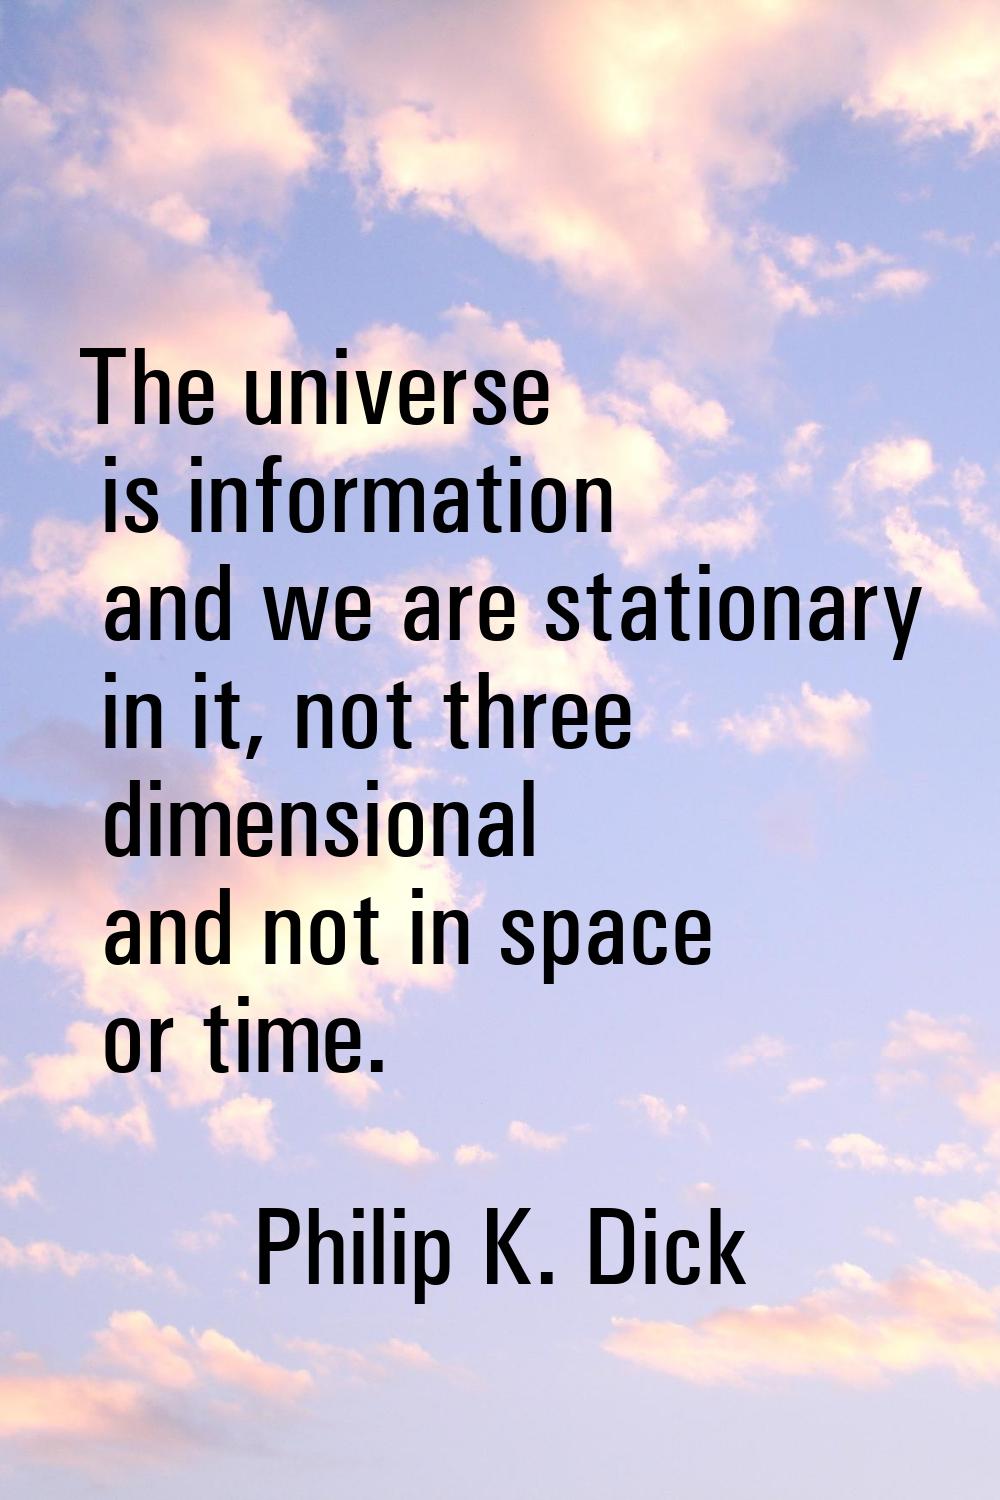 The universe is information and we are stationary in it, not three dimensional and not in space or 